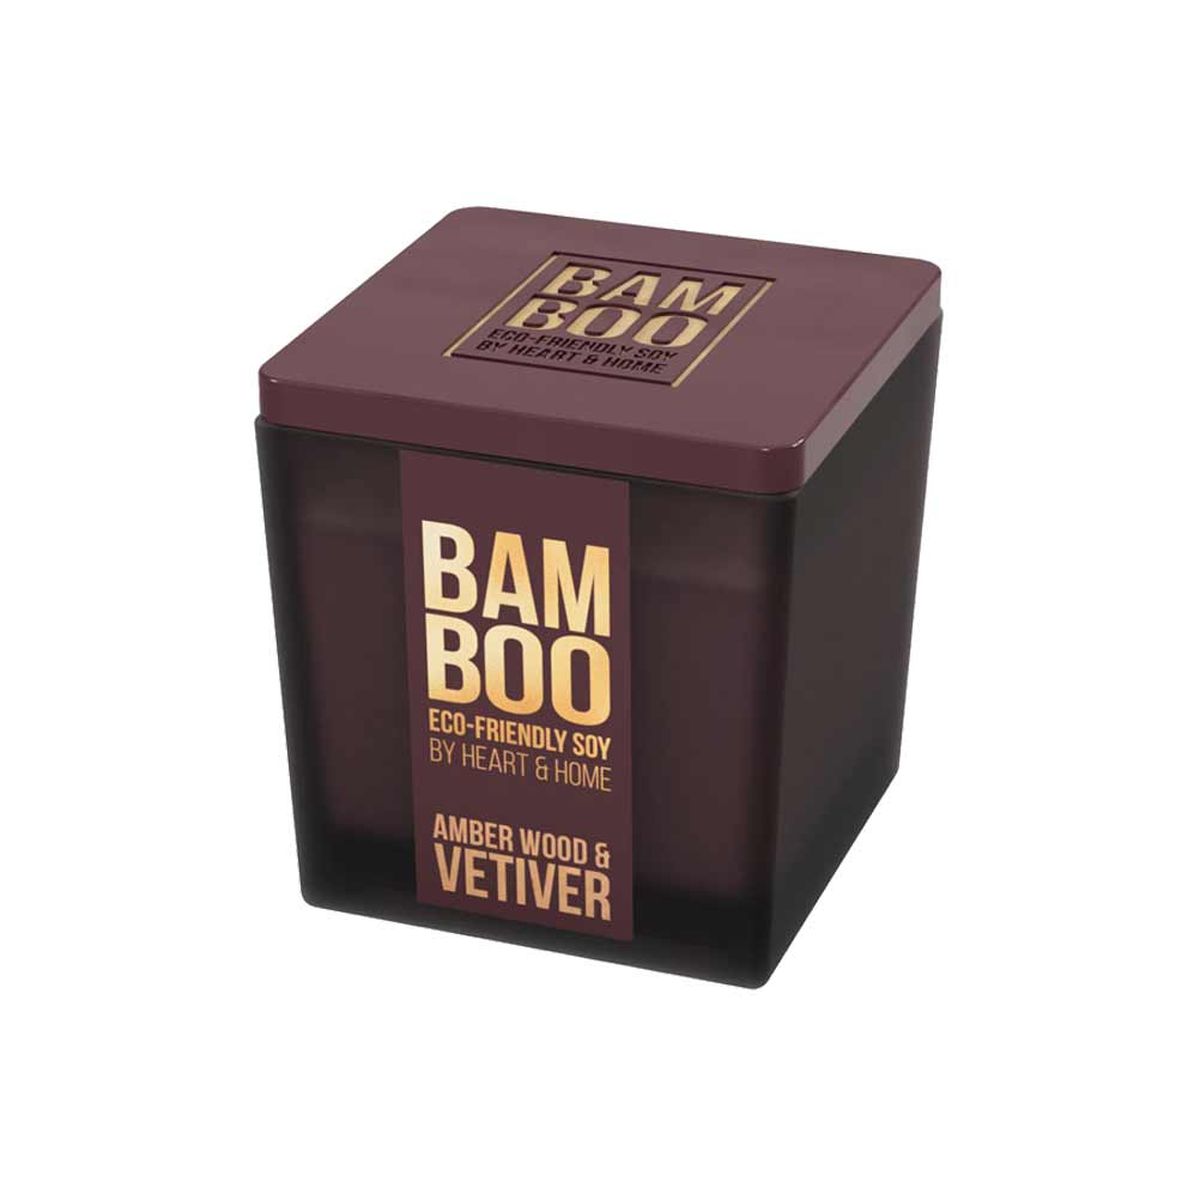 Bougie Heart and Home Bambou Bois d'Ambre et Vtiver